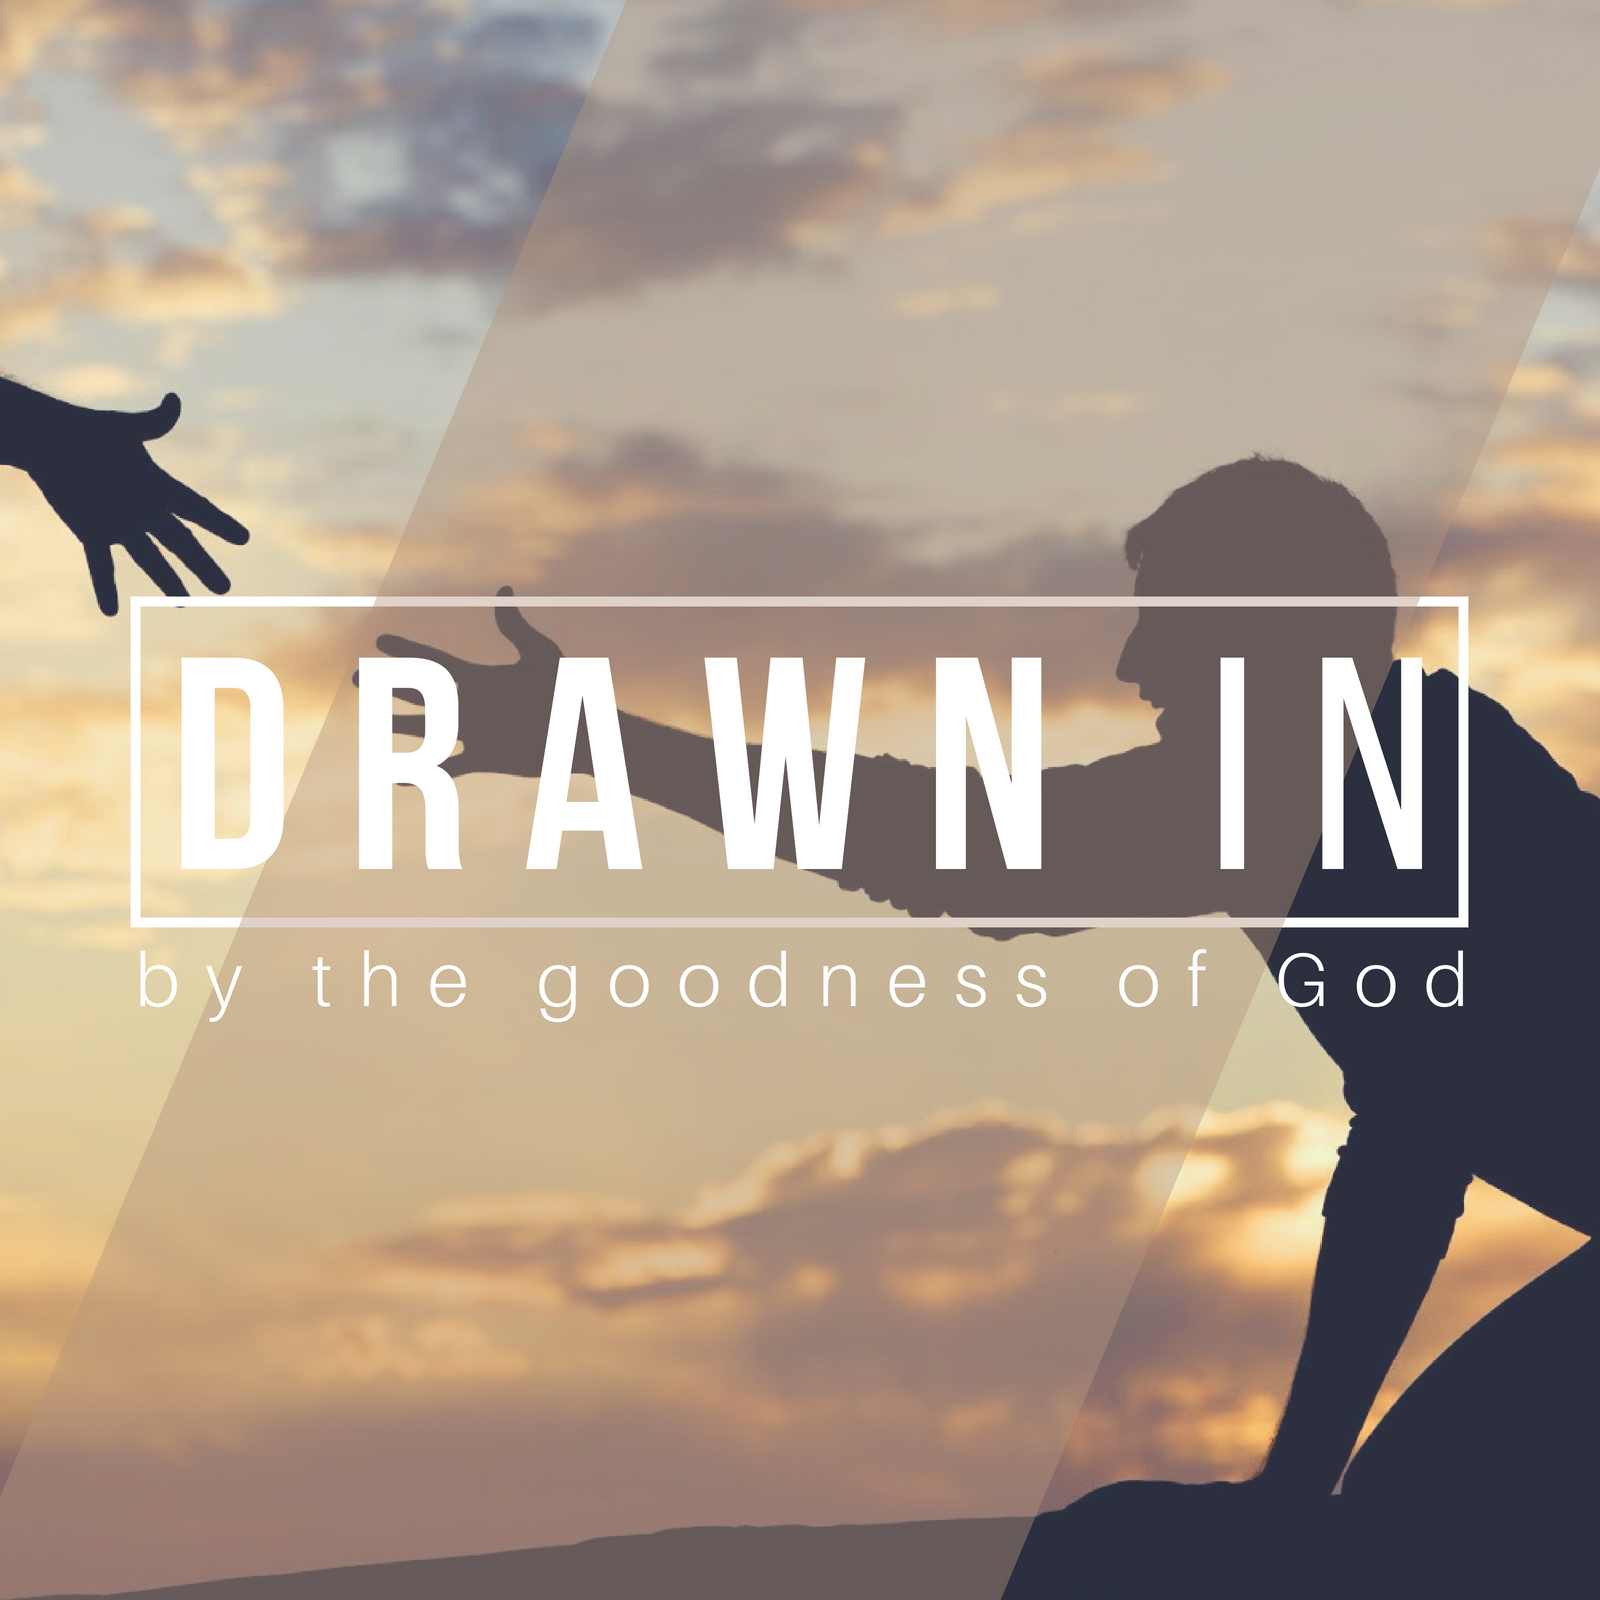 Drawn In by the Goodness of God